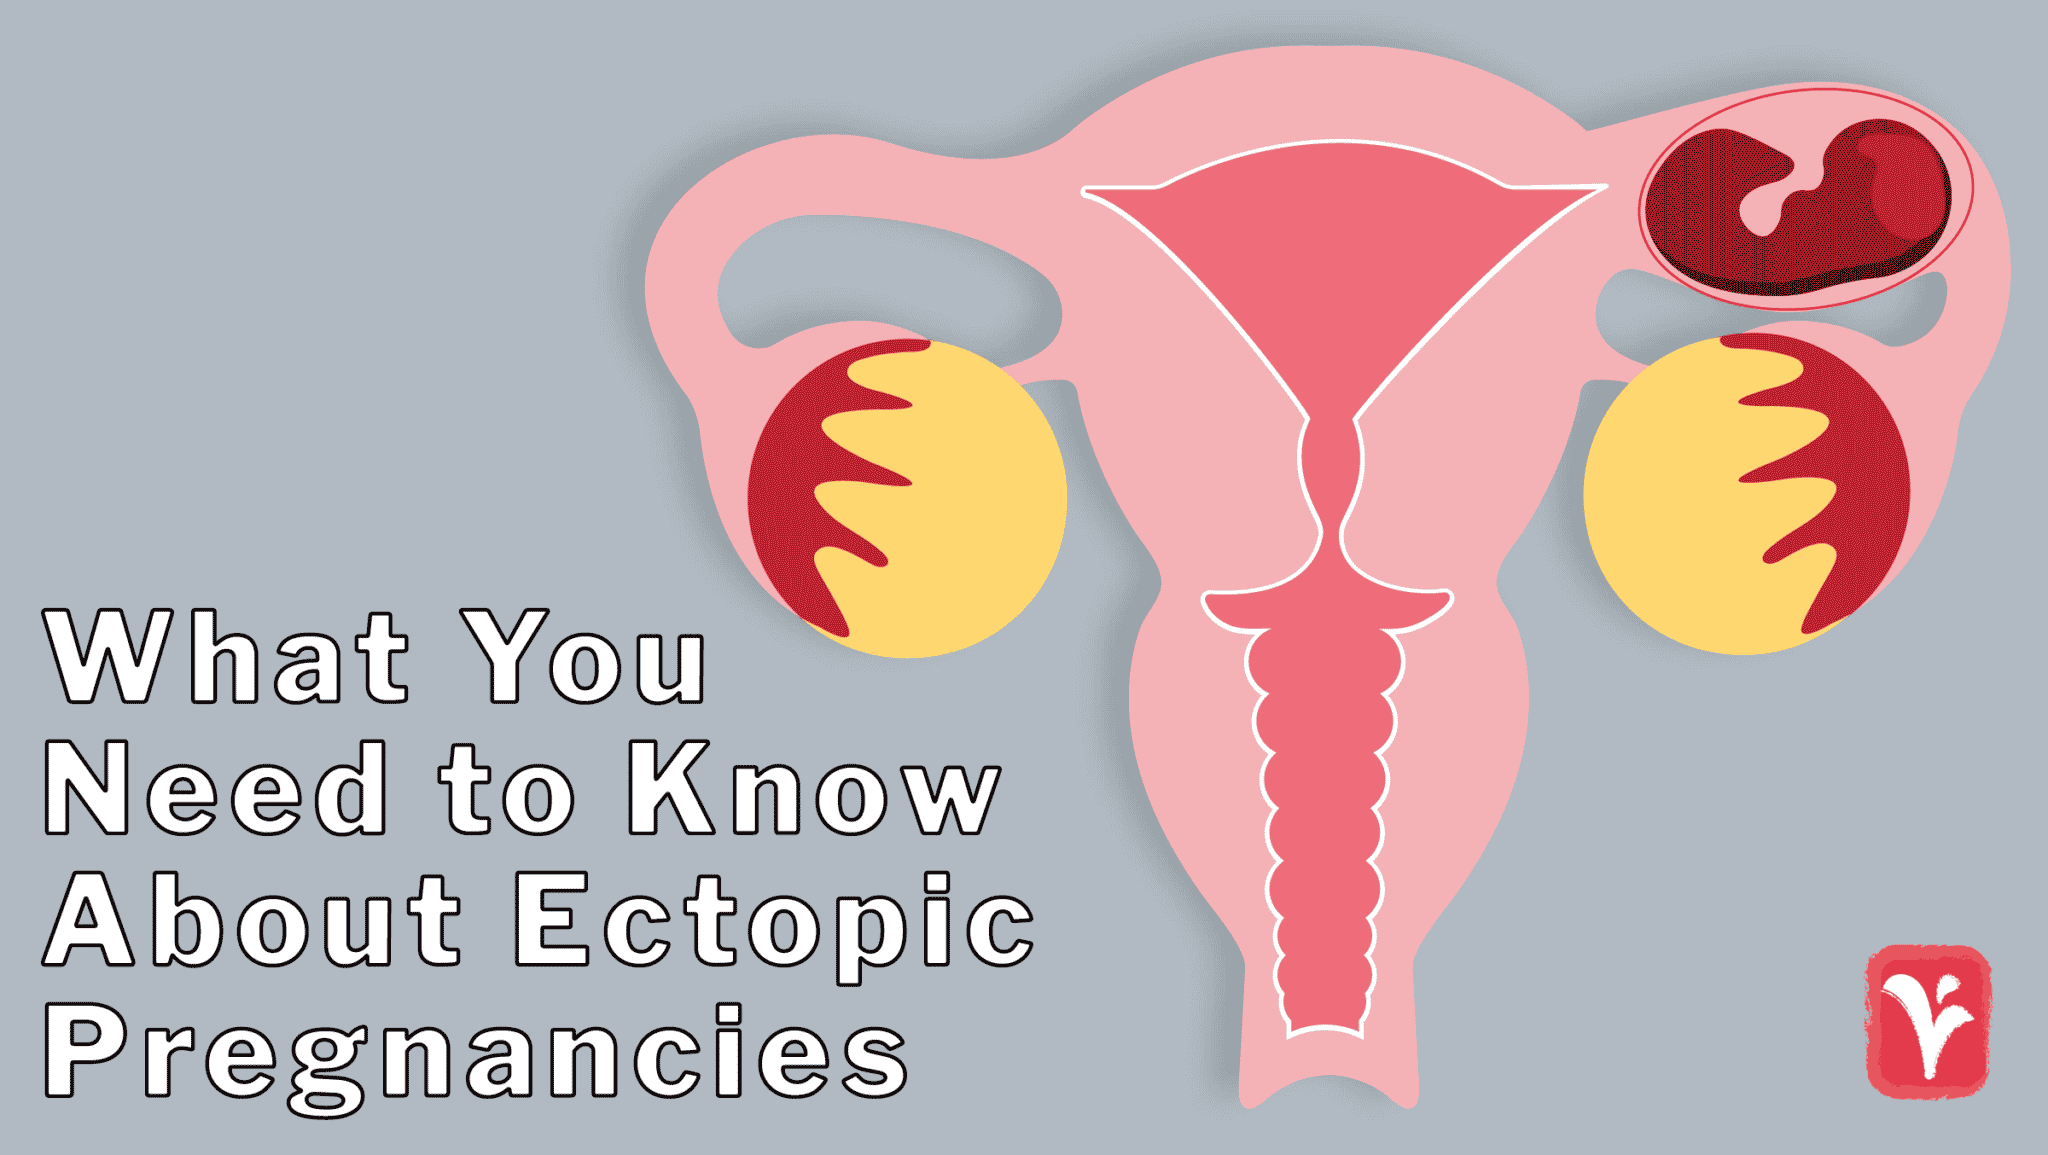 About Ectopic Pregnancies